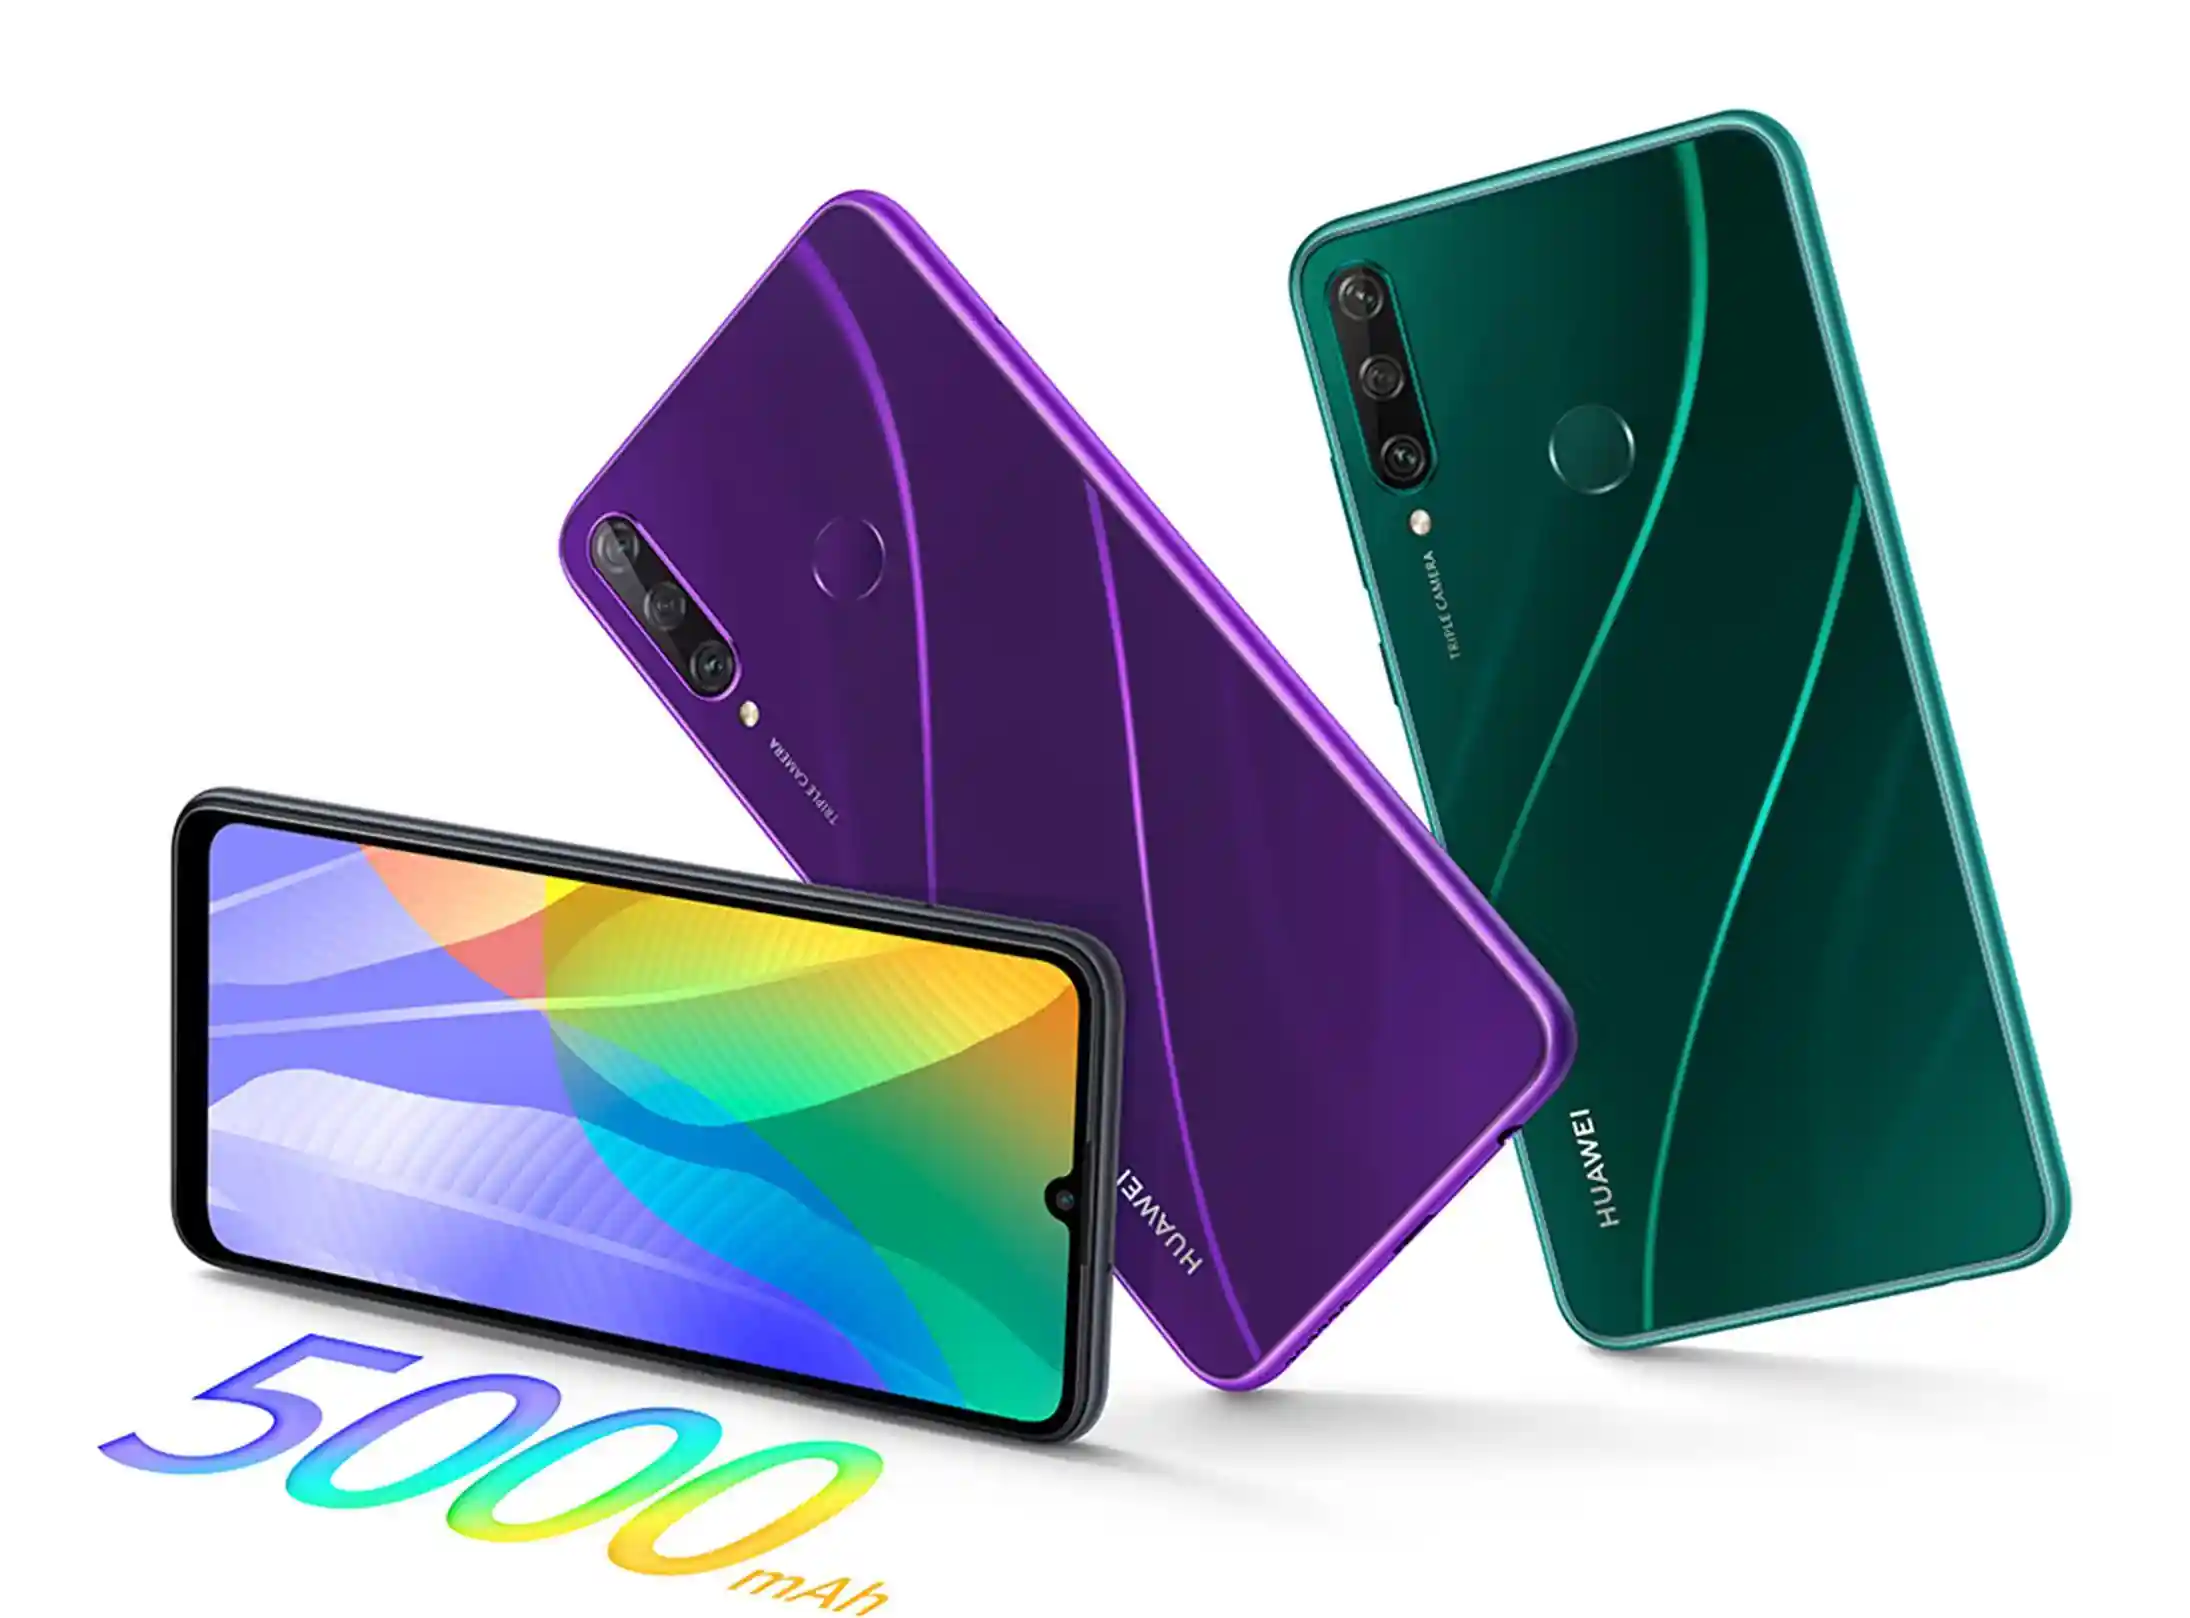 Huawei Y6p  Flyme OS  Android 10